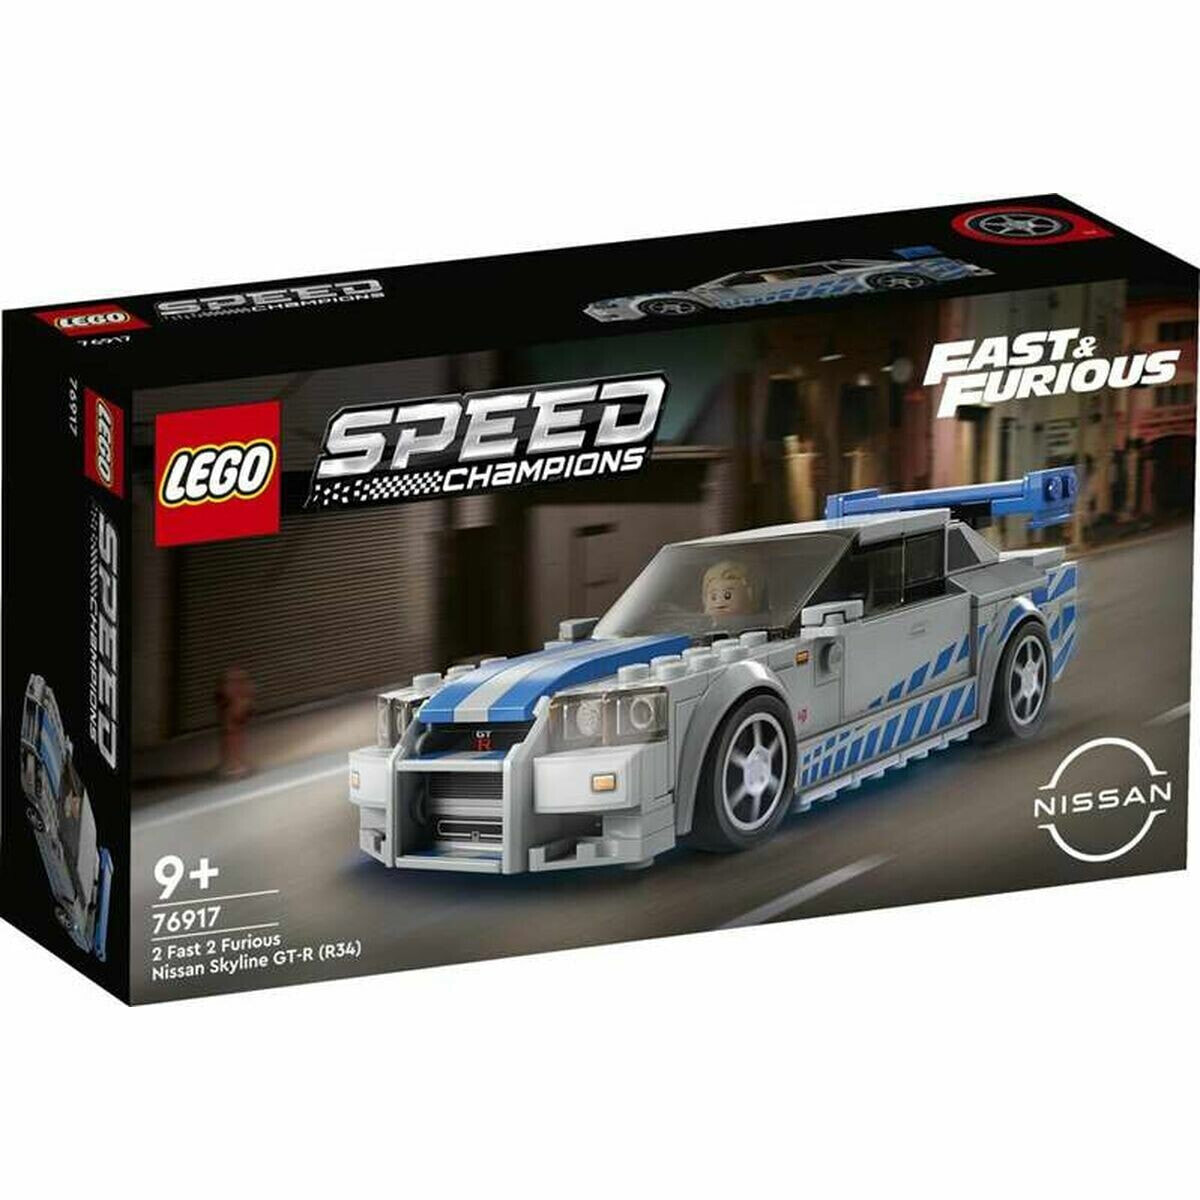 Playset Lego Fast and Furious: 76917 Nissan Skyline GT-R (R34) 319 Предметы